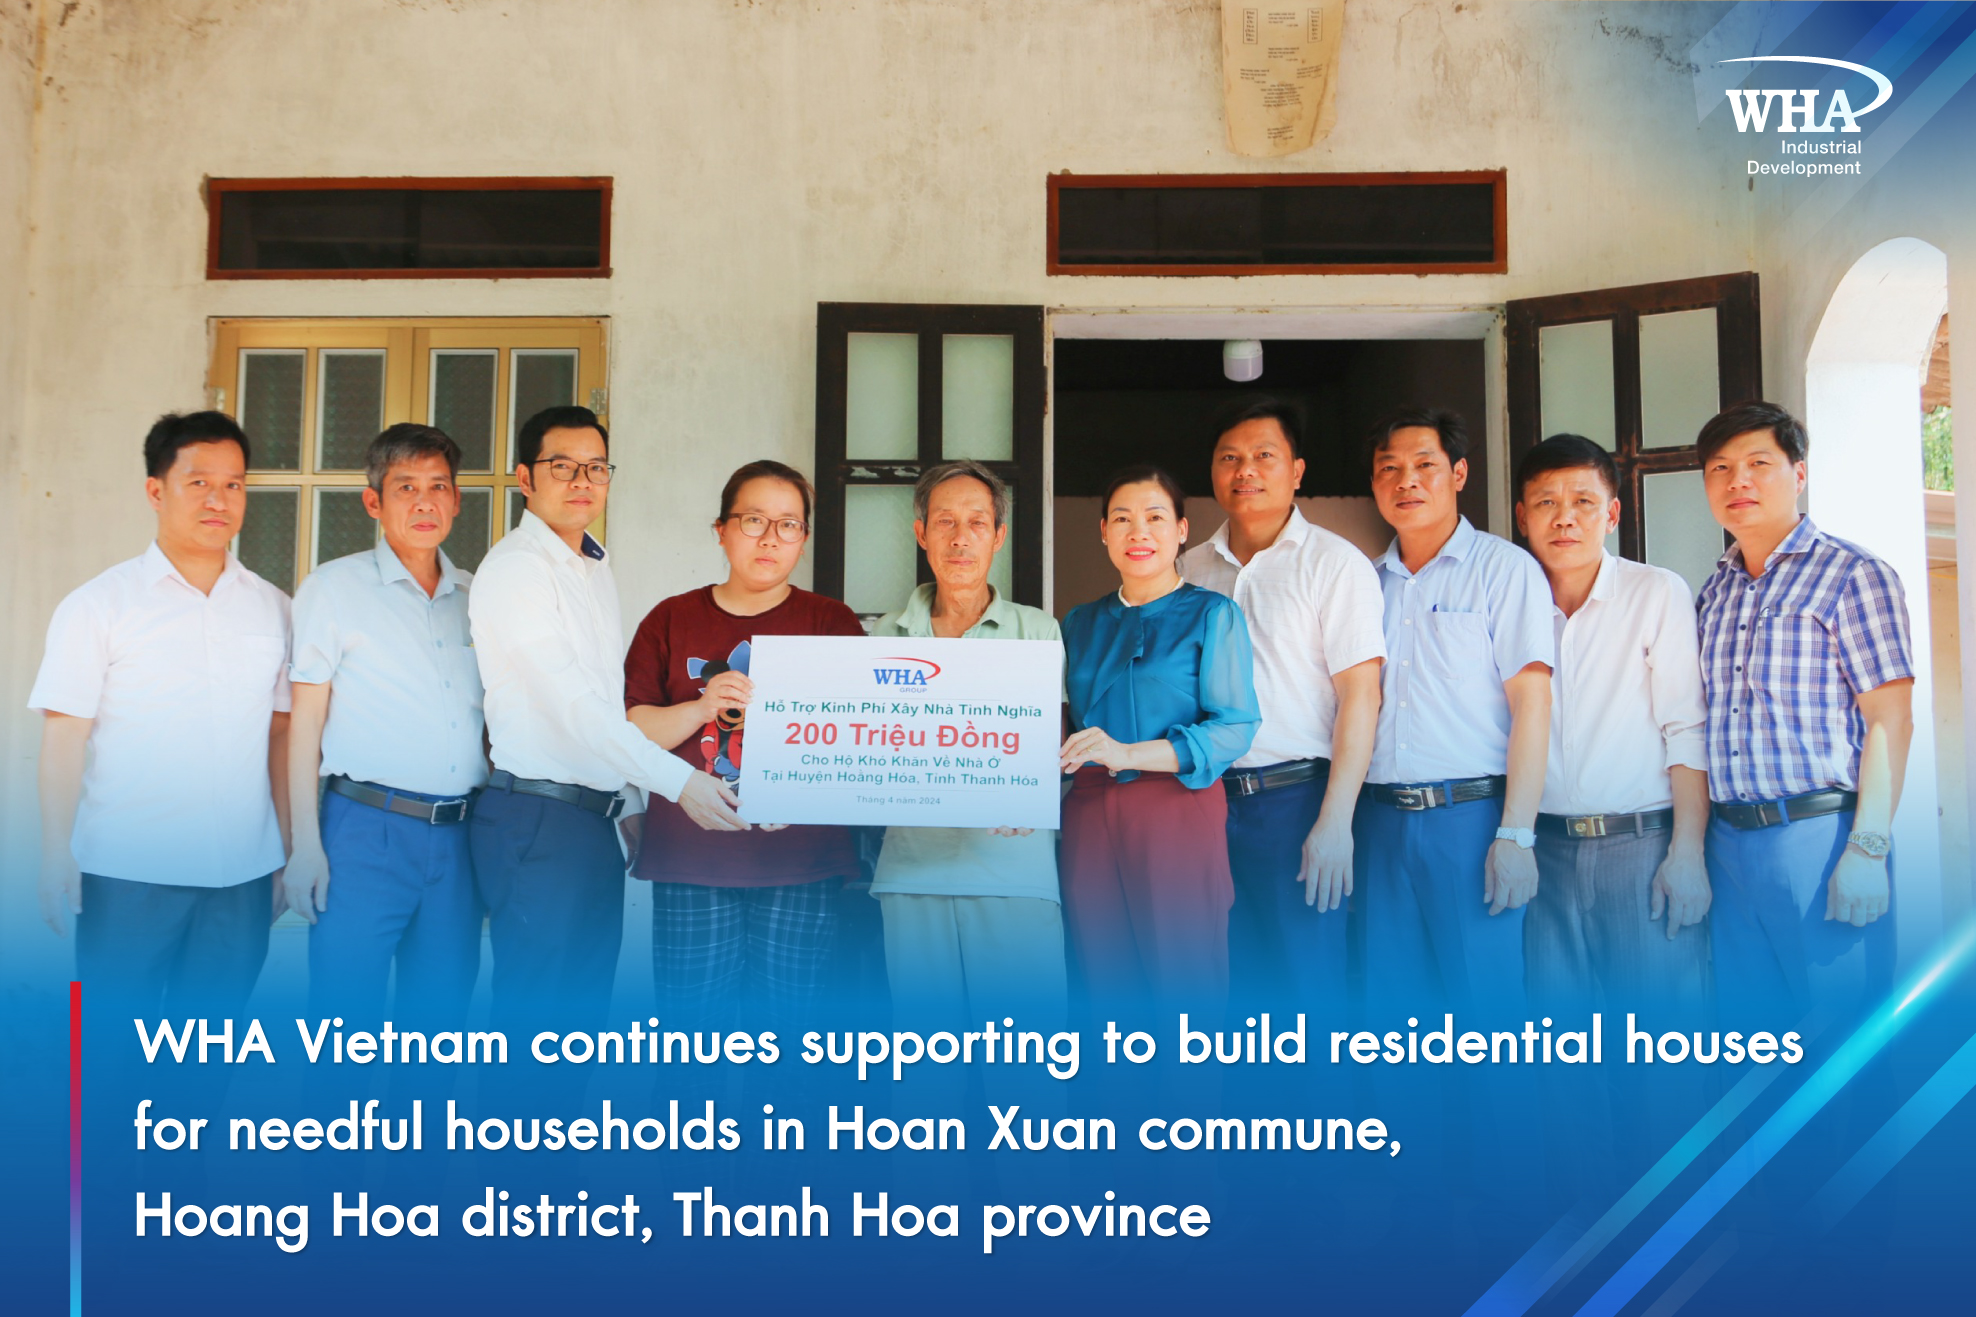 WHA Vietnam continues supporting to build residential houses for needful households in  Hoan Xuan commune, Hoang Hoa district, Thanh Hoa province